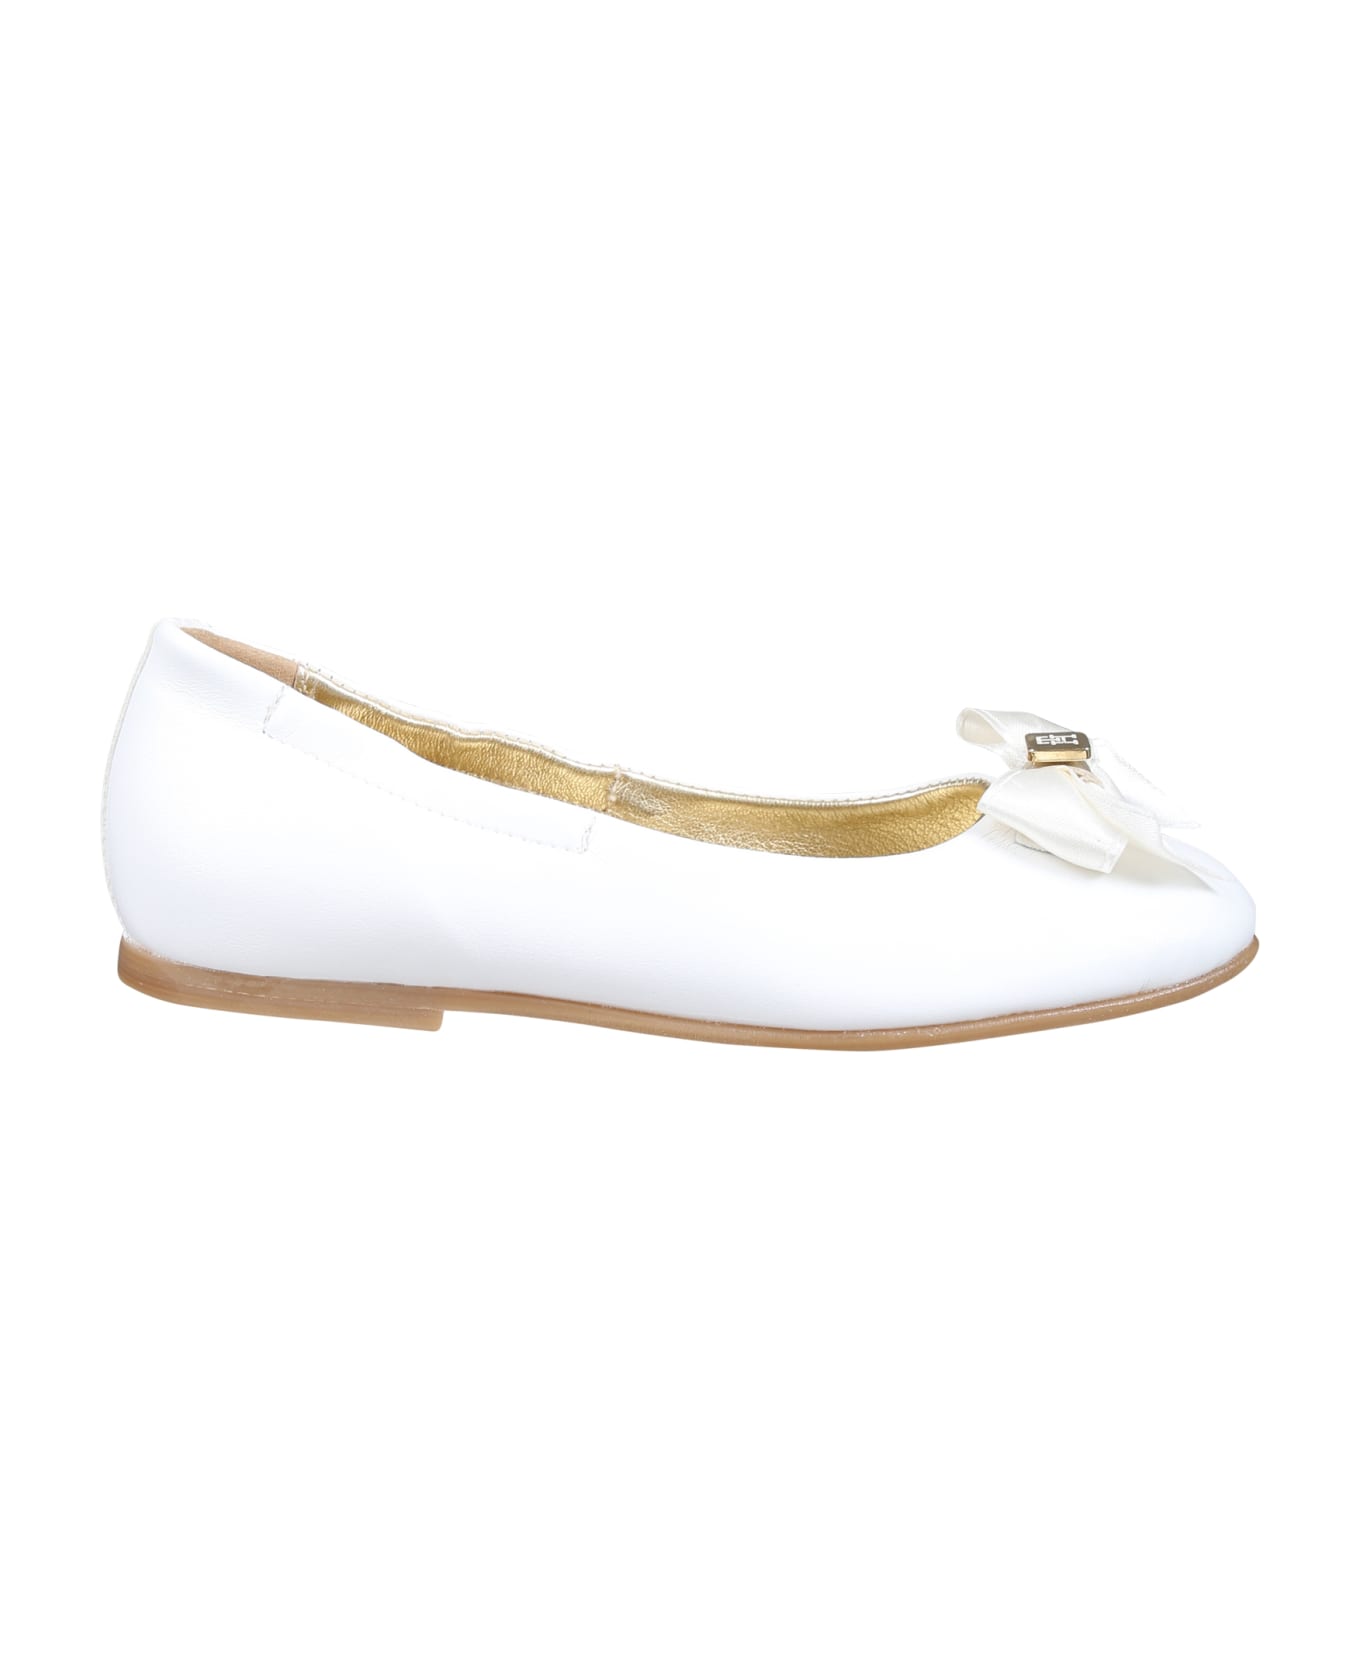 Tommy Hilfiger White Ballerines For Girl With Bow And Logo - White シューズ